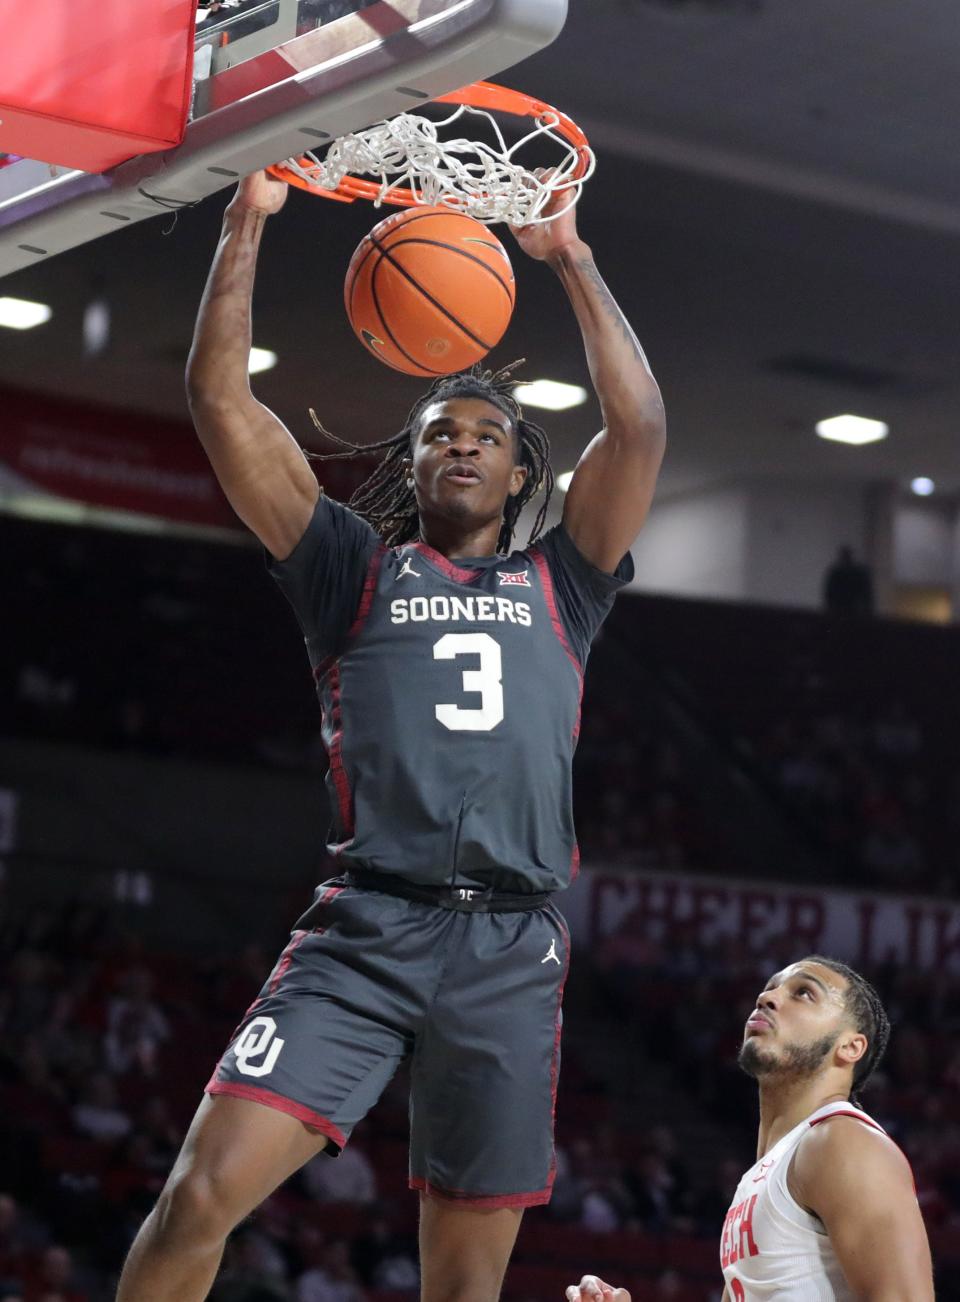 Oklahoma Sooners guard Otega Oweh (3) dunks the ball beside Texas Tech Red Raiders forward Kevin Obanor (0) during a men's college basketball game between the University of Oklahoma Sooners (OU) and Texas Tech at Lloyd Noble Center in Norman, Okla., Tuesday, Feb. 21, 2023. 